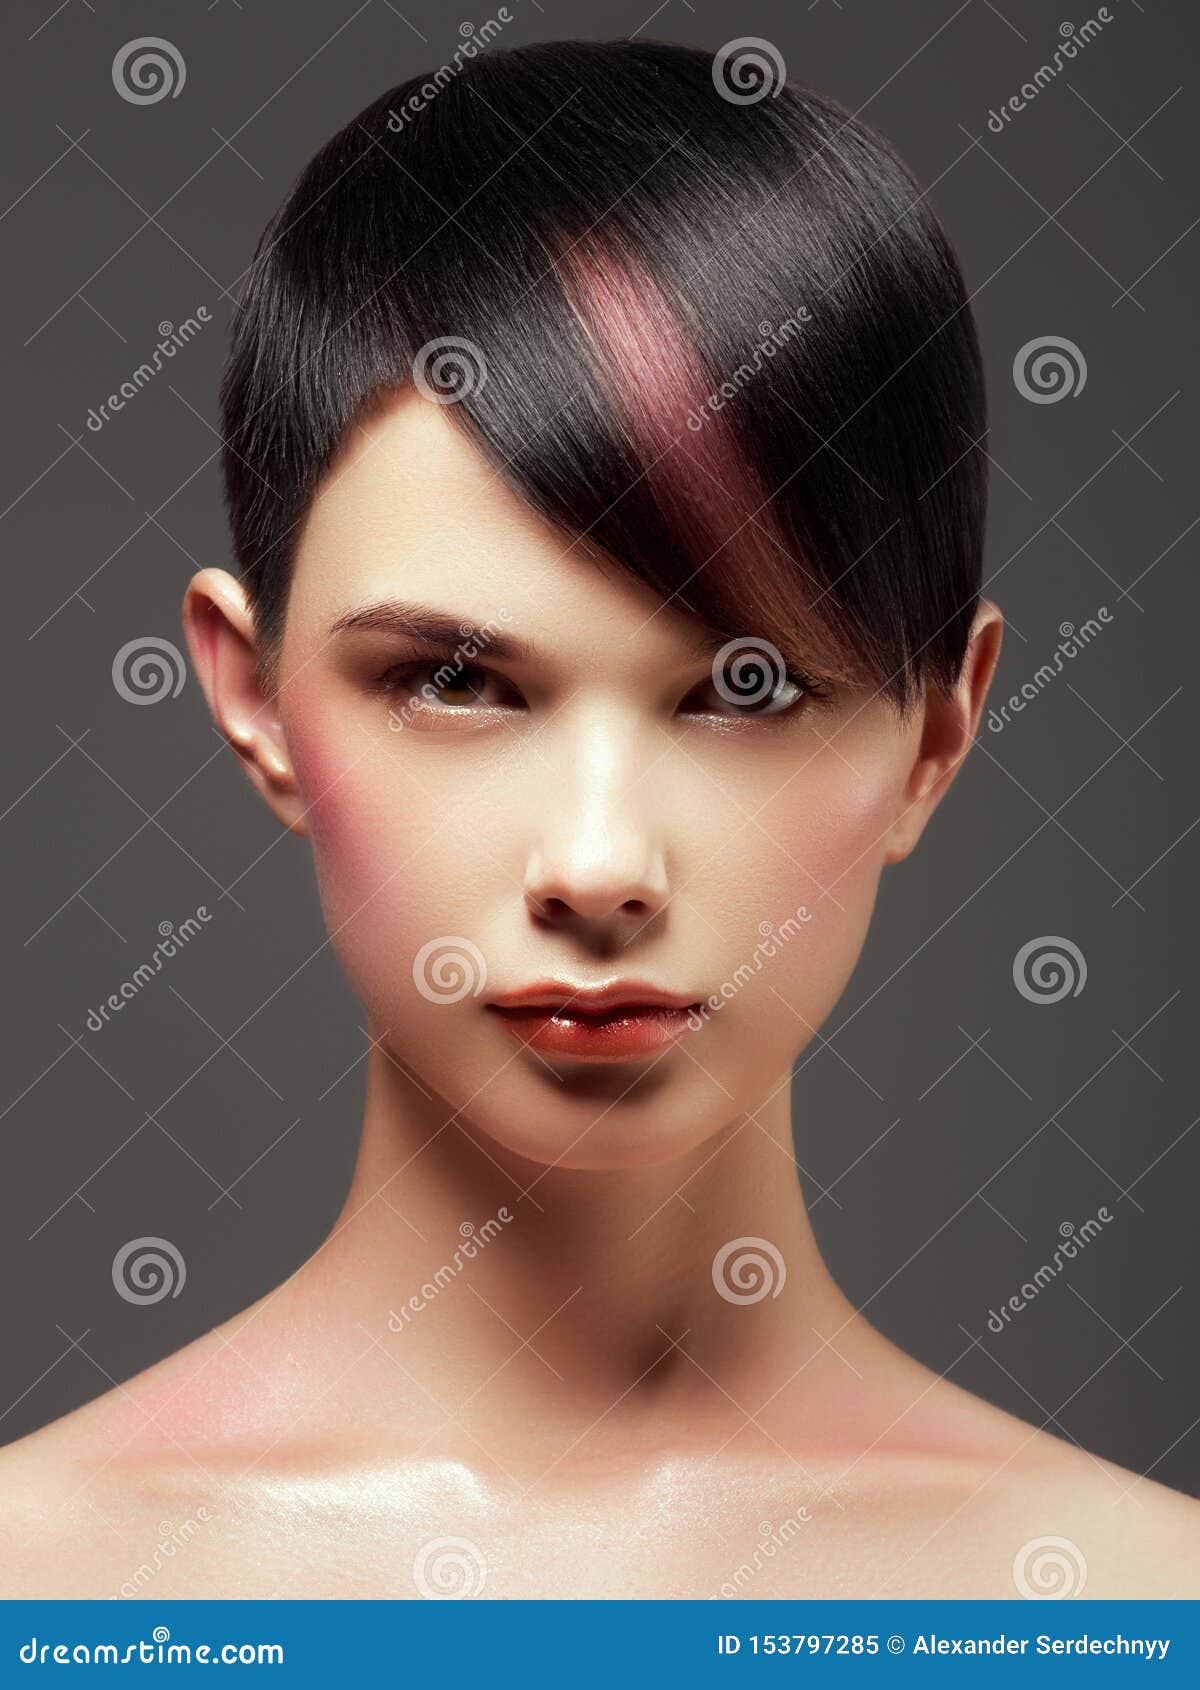 Hair Salon. Trendy Hair Style. Short Haircut. Hairdressing. Fashion and  Beauty Concept Stock Image - Image of glamour, fashion: 153797285